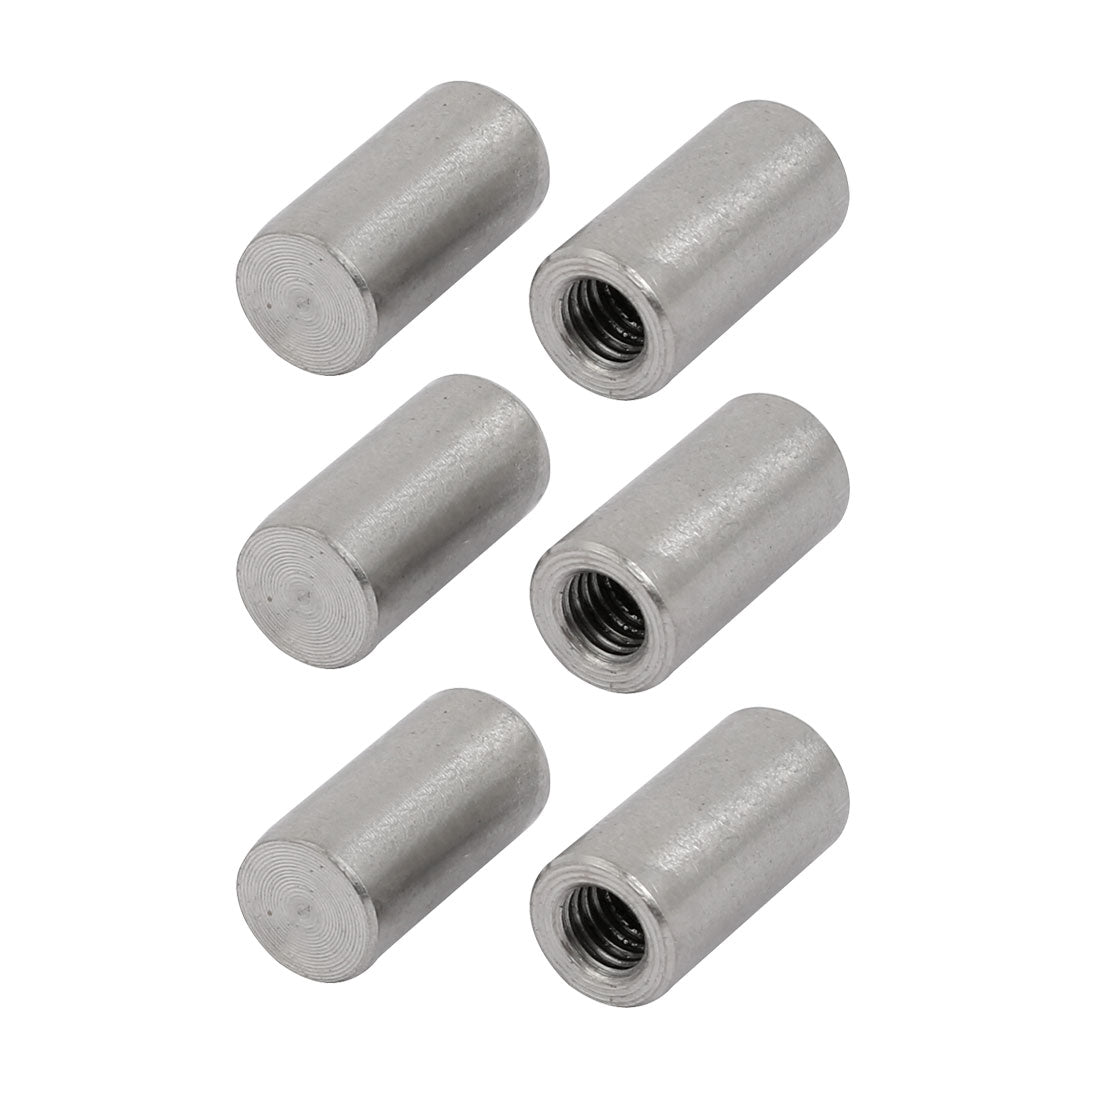 uxcell Uxcell 304 Stainless Steel M5 Female Thread 8mm x 16mm Cylindrical Dowel Pin 6pcs